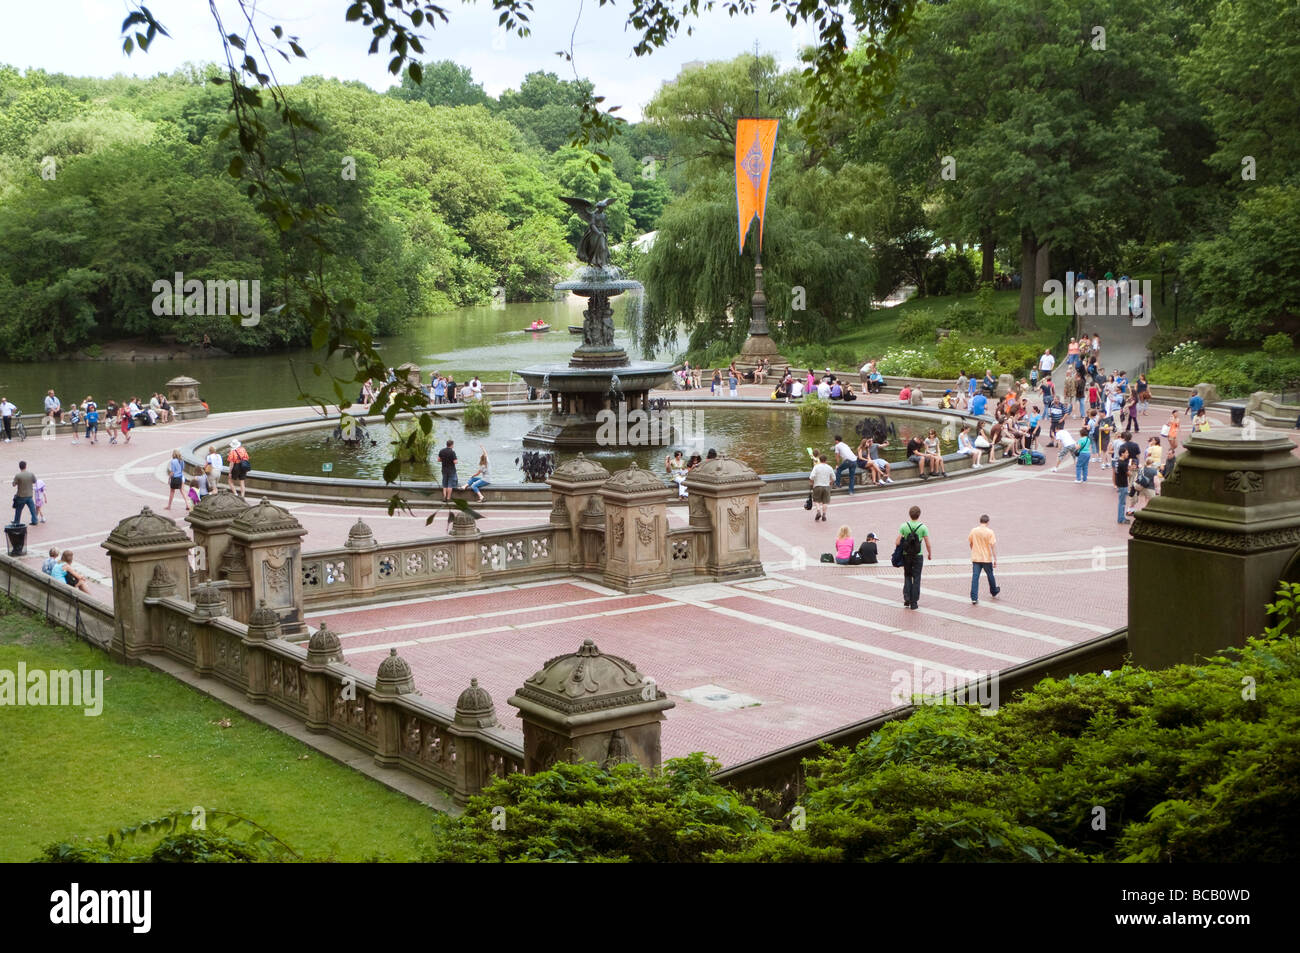 1,730 Bethesda Fountain Central Park Royalty-Free Images, Stock